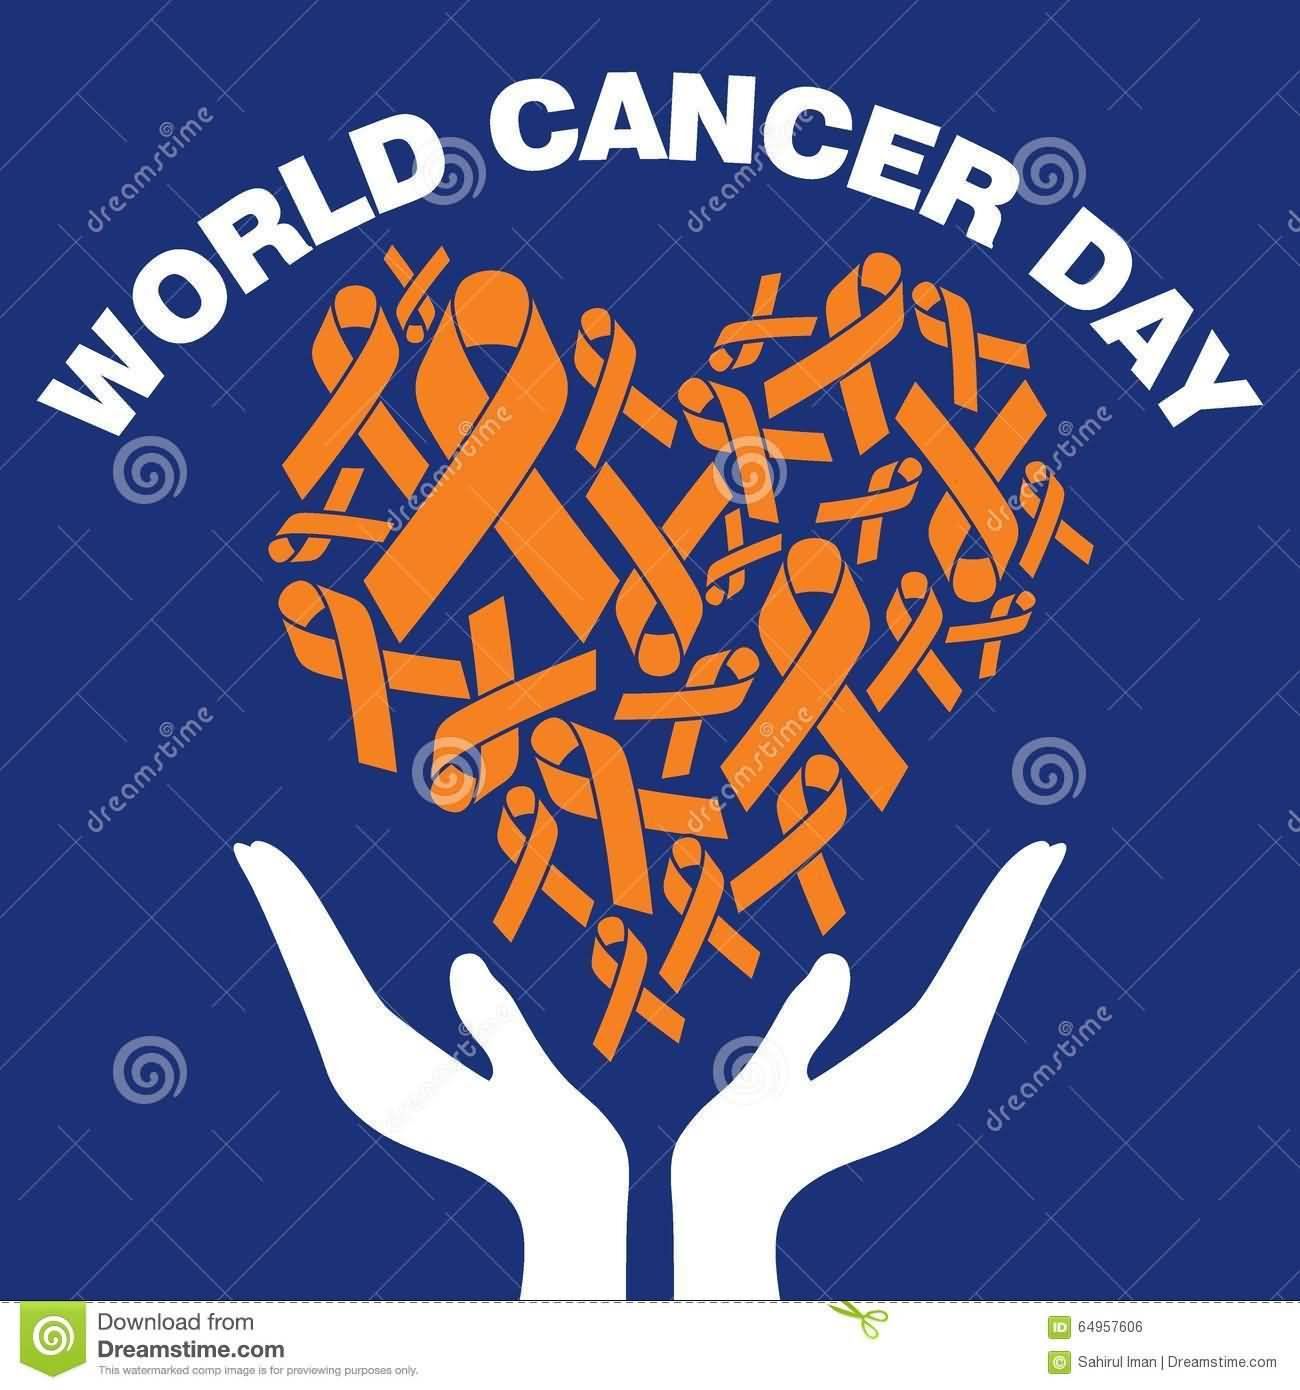 World Cancer Day Orange Ribbons And Joined Hands Illustration